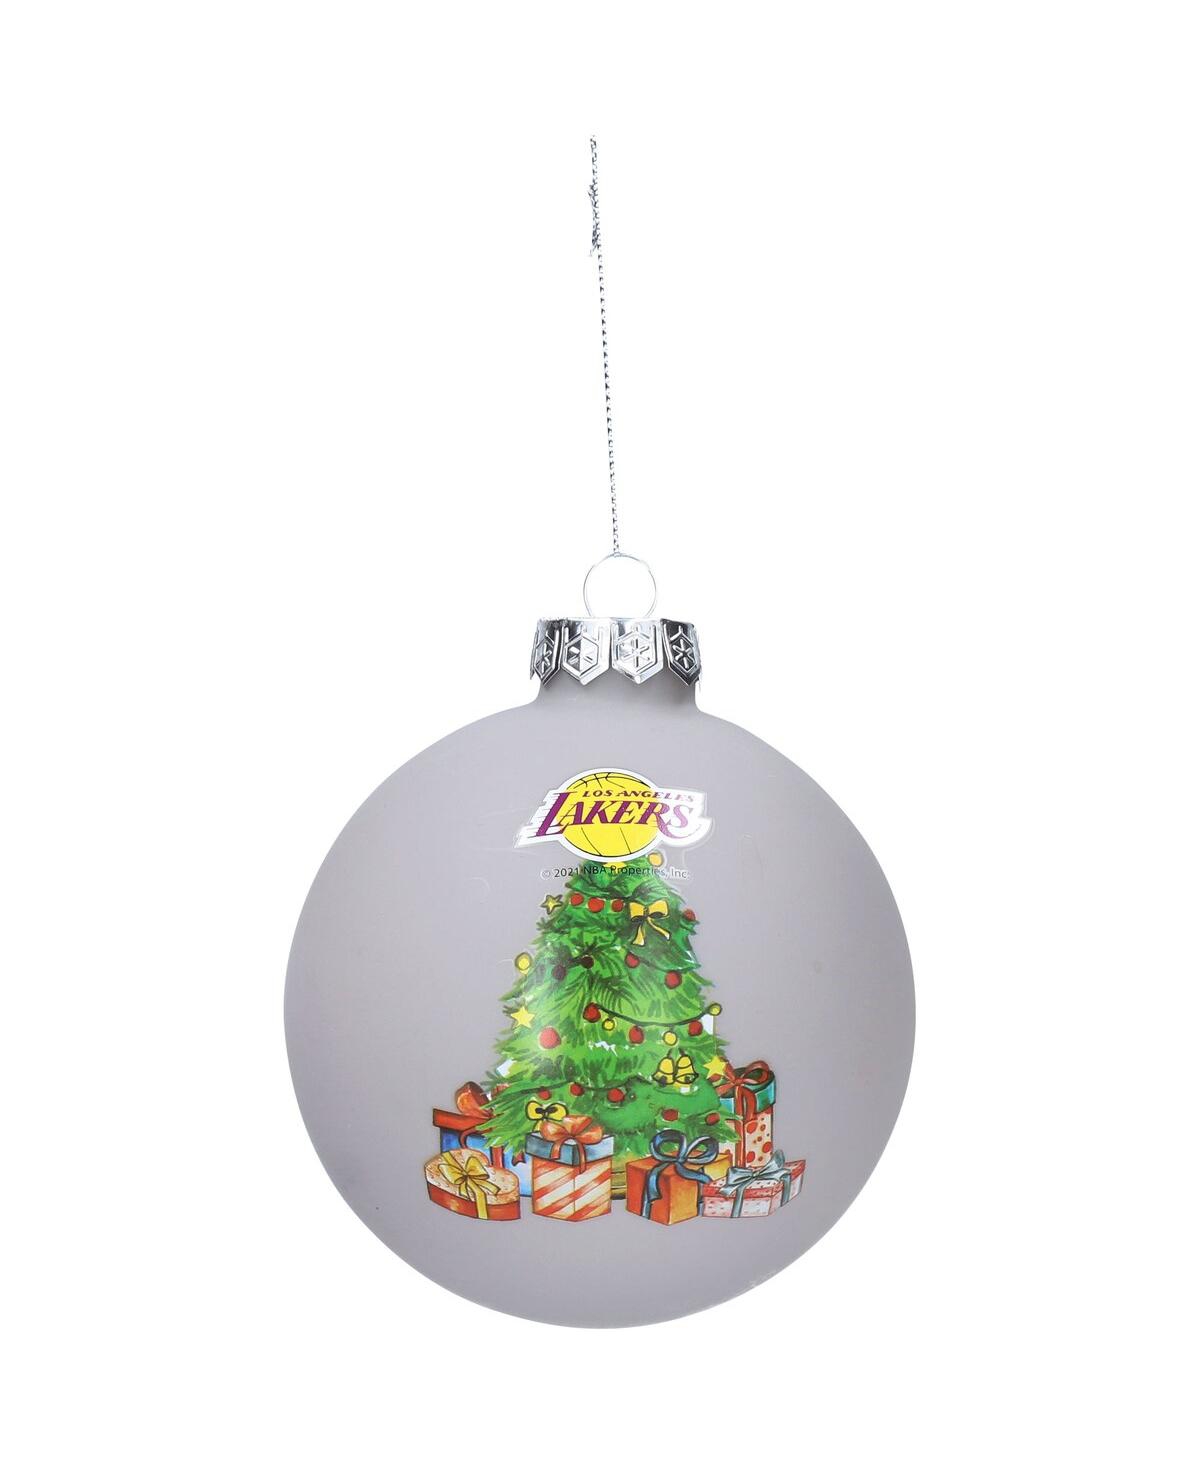 Los Angeles Lakers Tree Frosted Ball Ornament - Gray